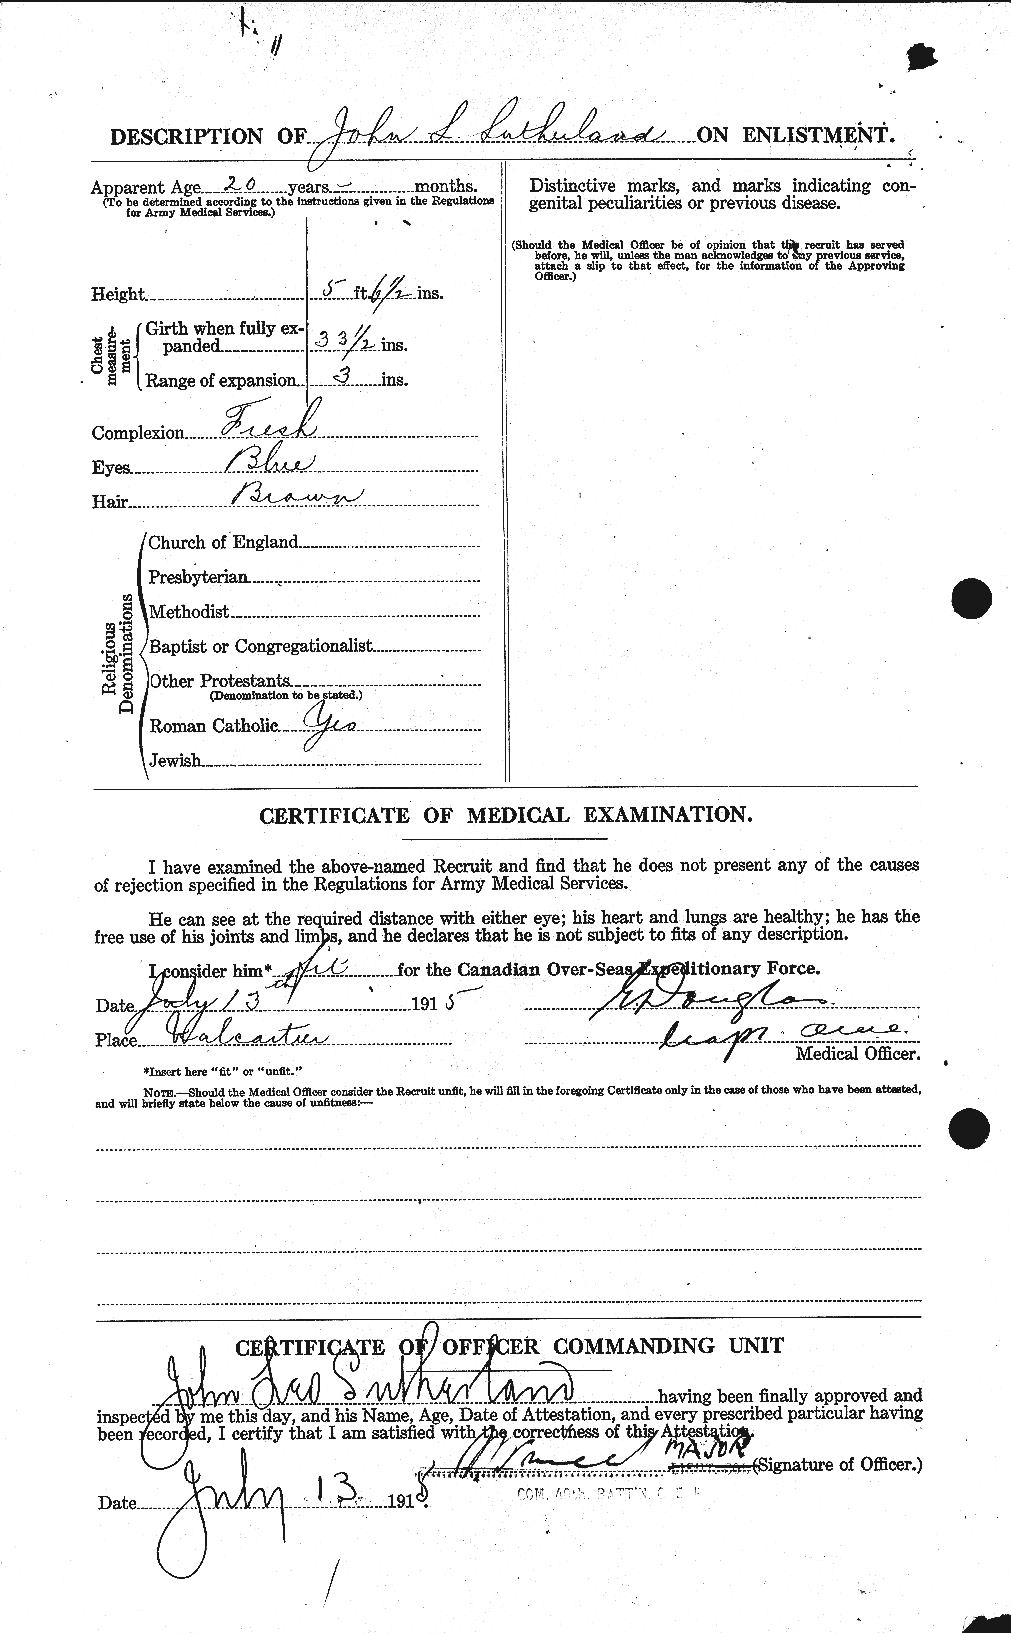 Personnel Records of the First World War - CEF 124682b